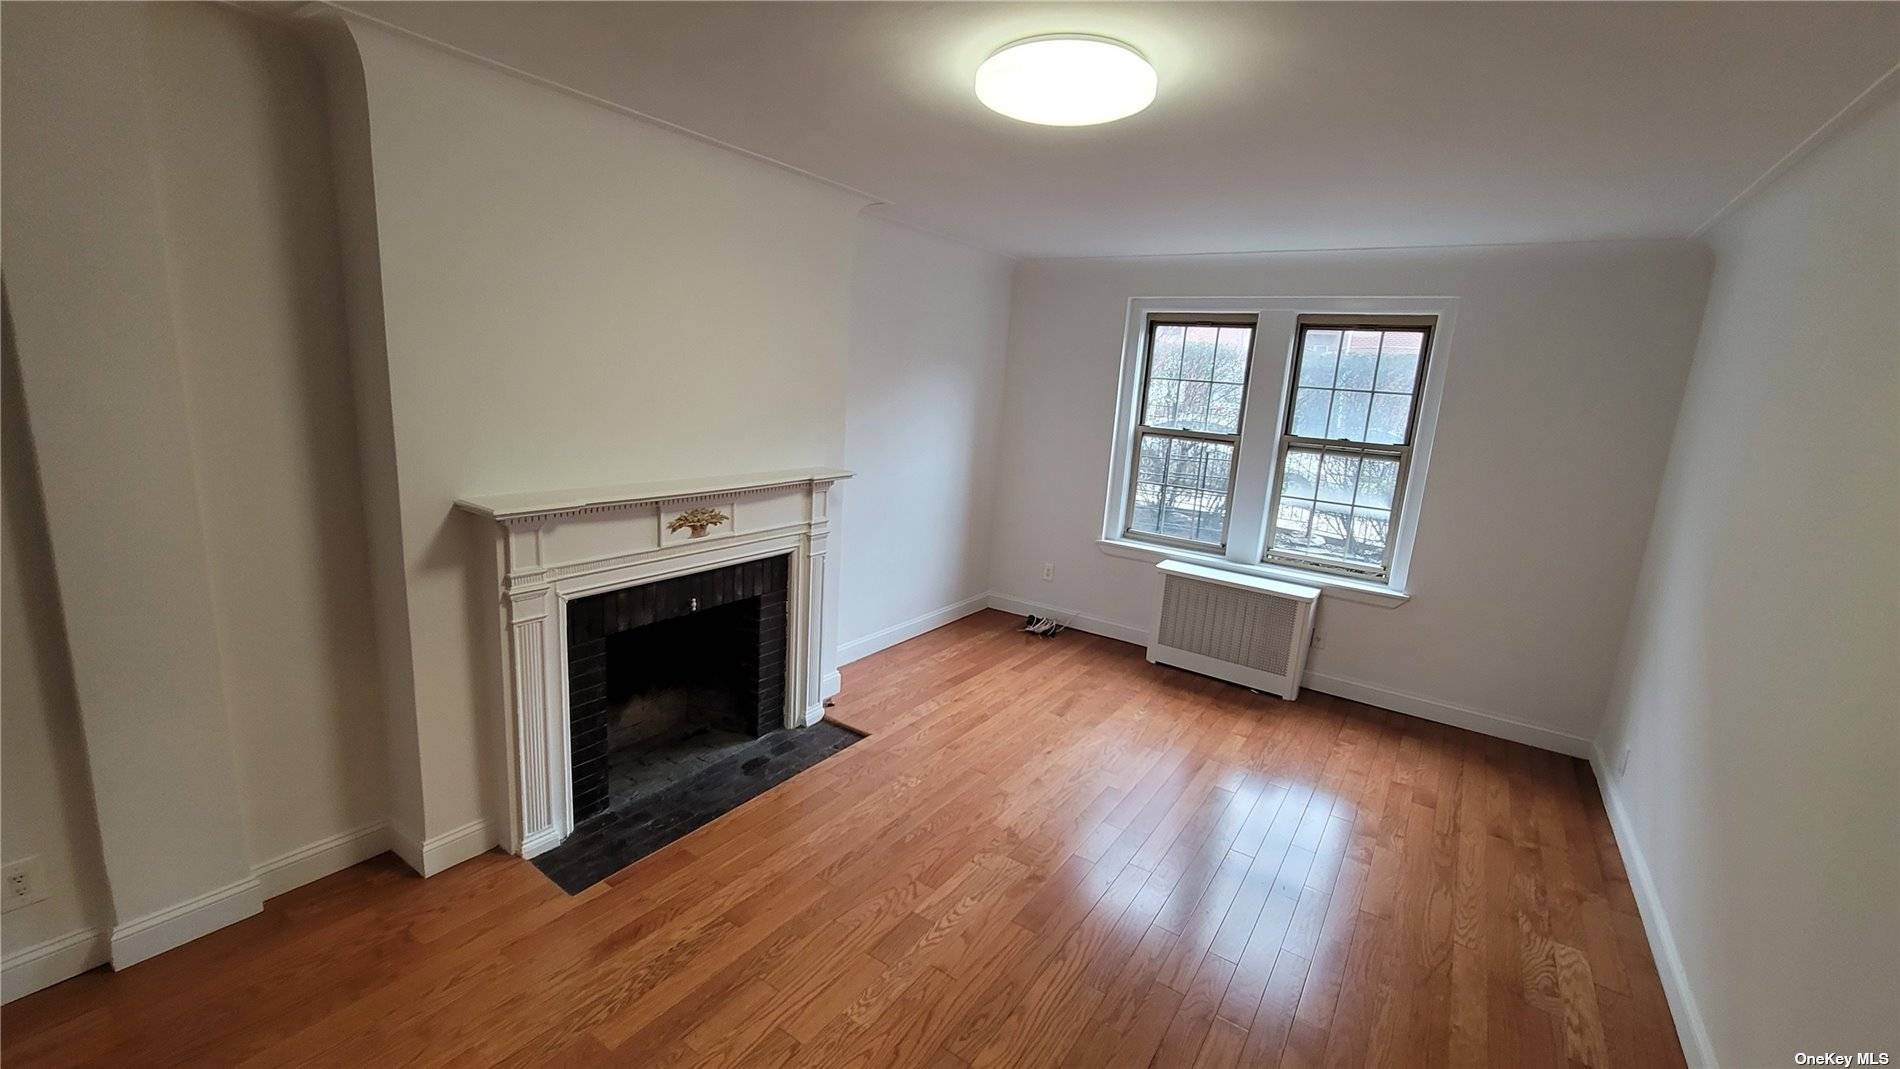 Welcome to this spacious apartment featuring a genuine wood burning fireplace, boasting 9.